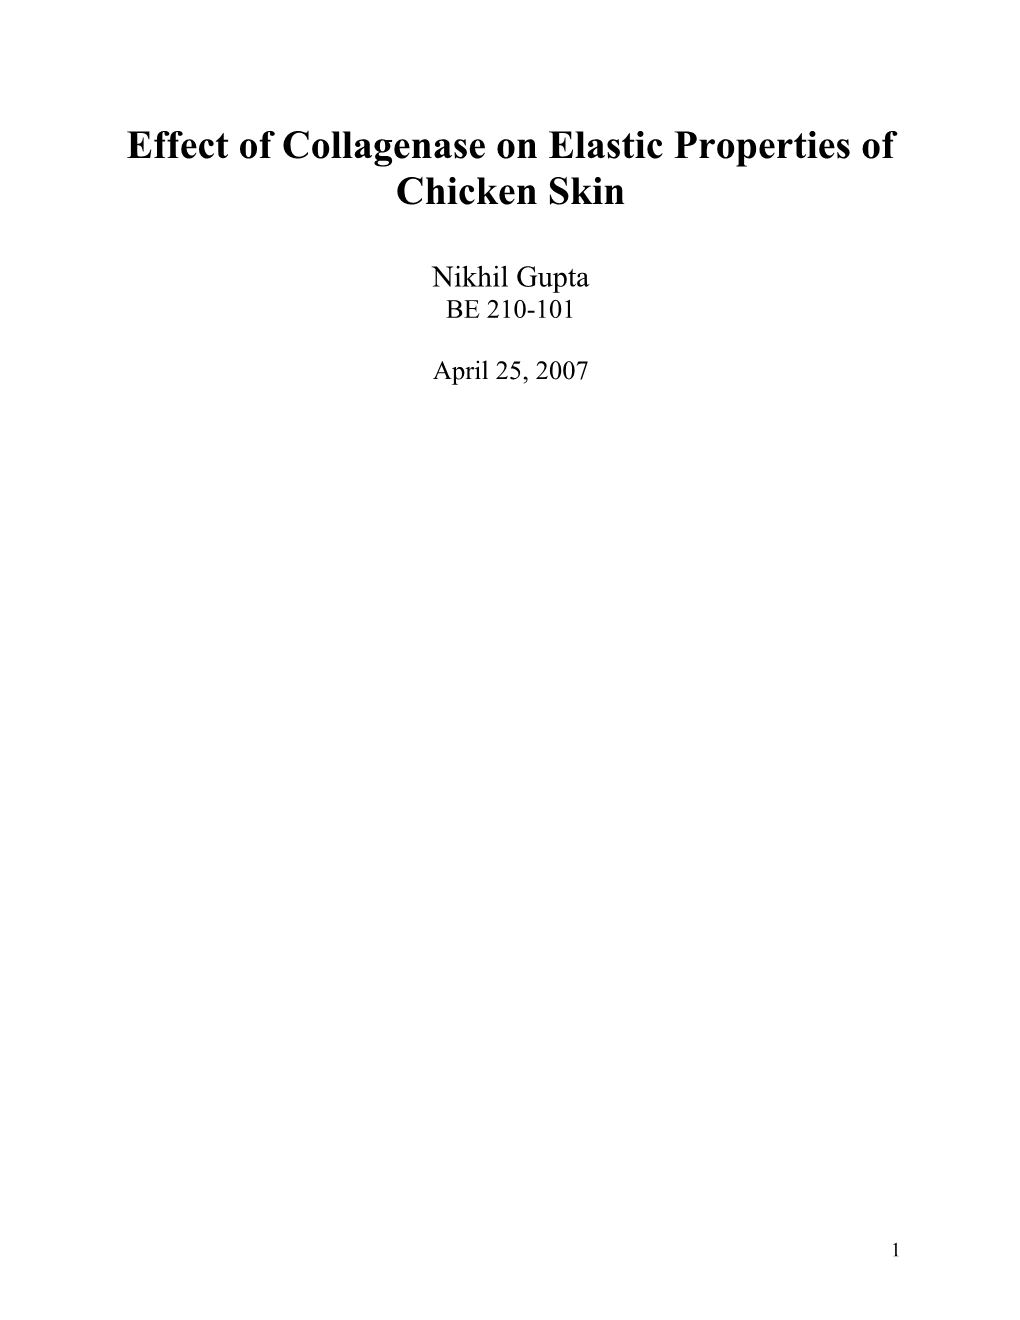 Effect of Collagenase on Structural and Material Properties of Chicken Skin